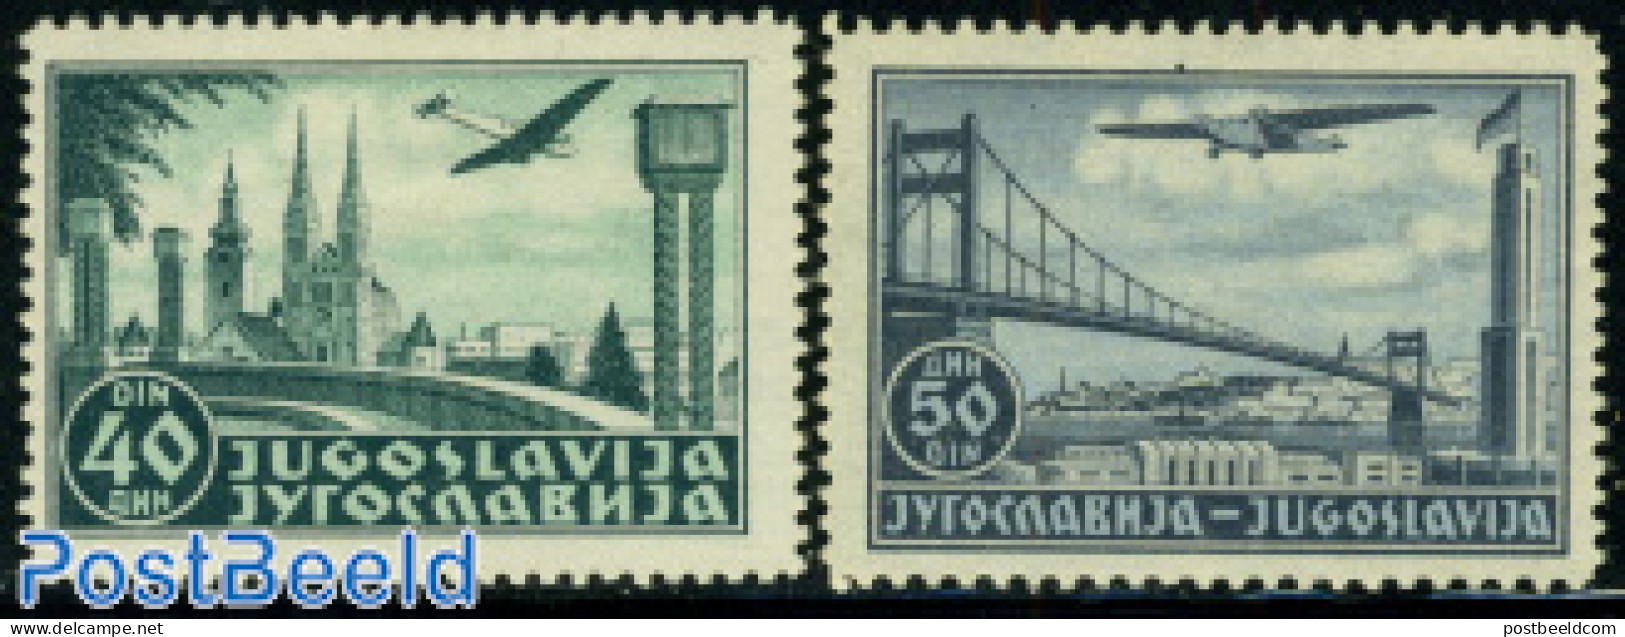 Yugoslavia 1940 Aeroplanes Over Landscapes 2v, Mint NH, Religion - Transport - Churches, Temples, Mosques, Synagogues .. - Neufs